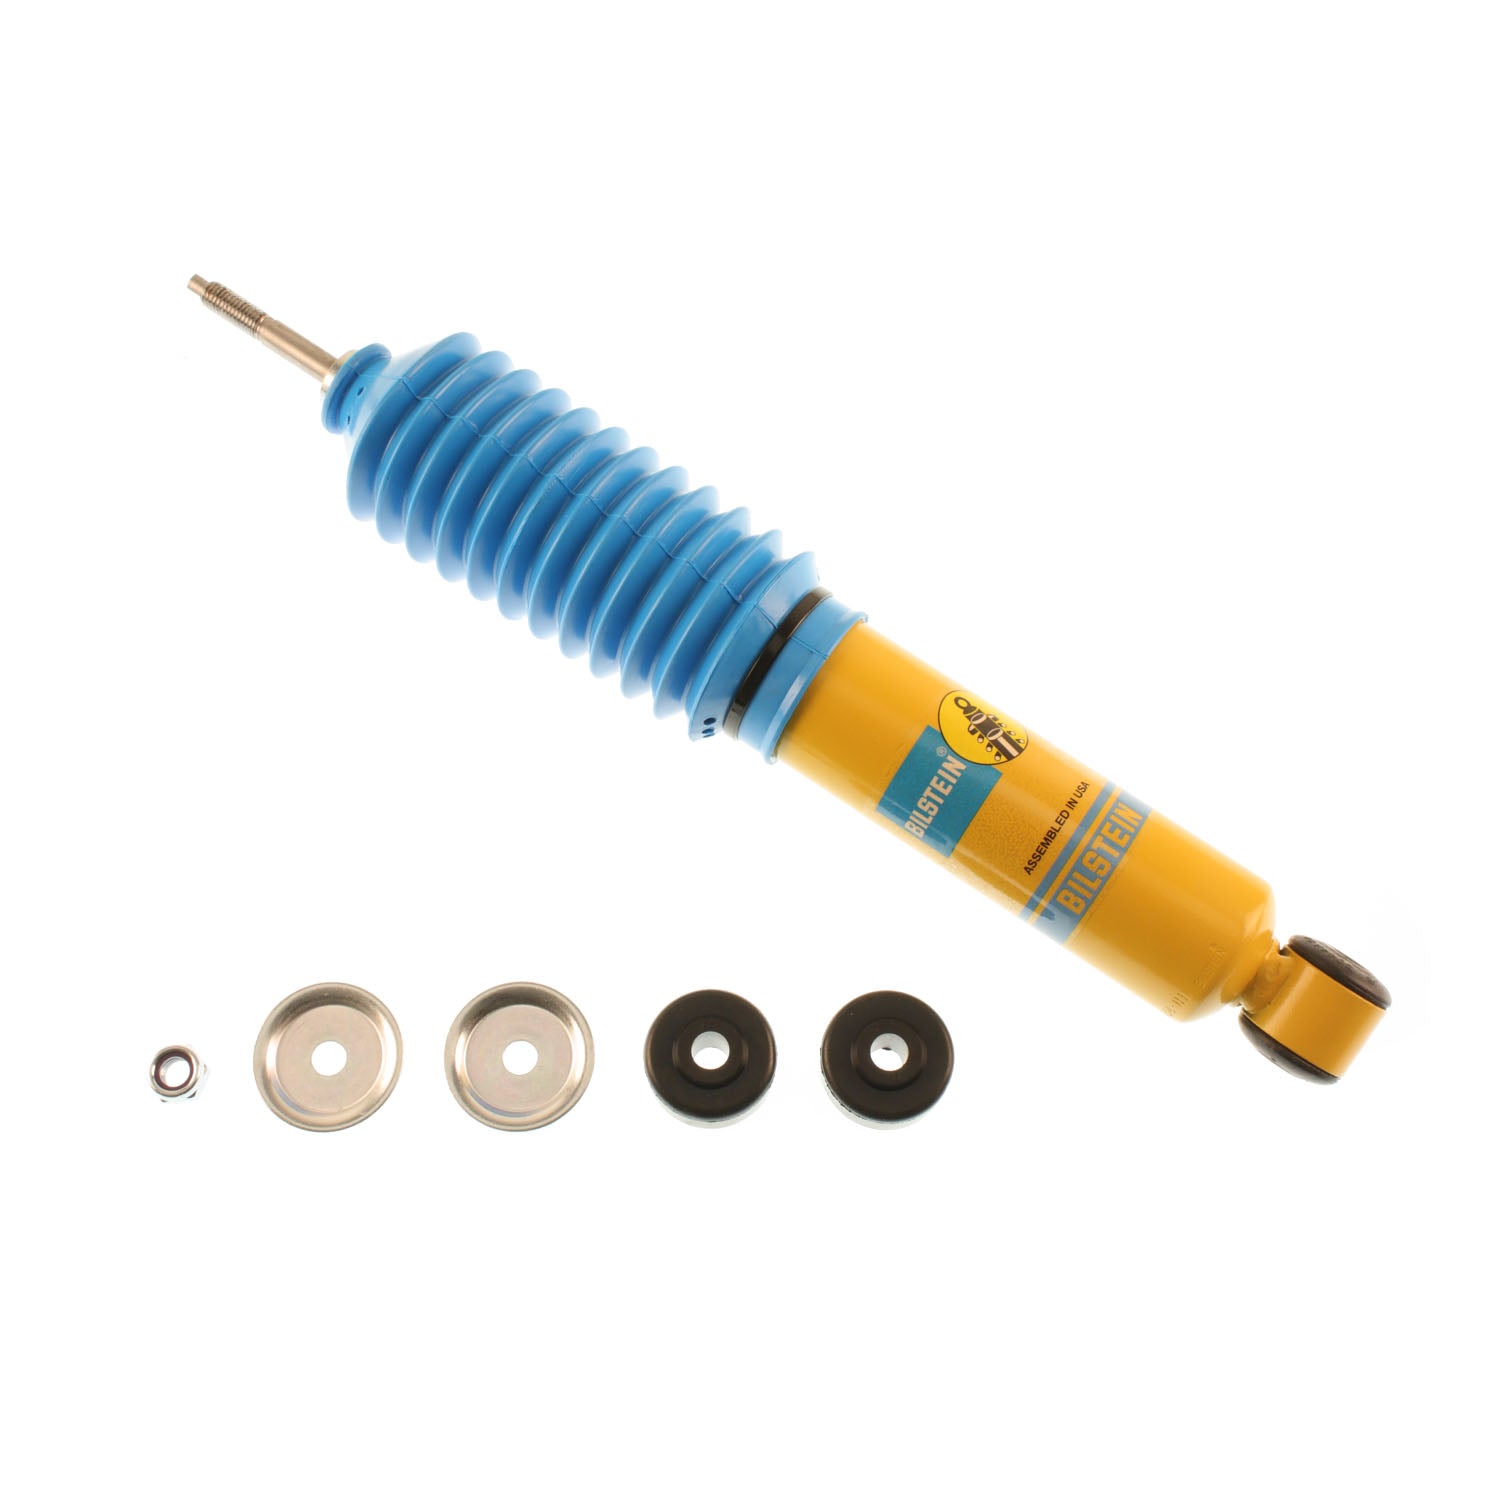 Bilstein 4600  Ford Light Truck For Ford F-150, F-150 Heritage, Ford F-250, Ford F-250 Hd